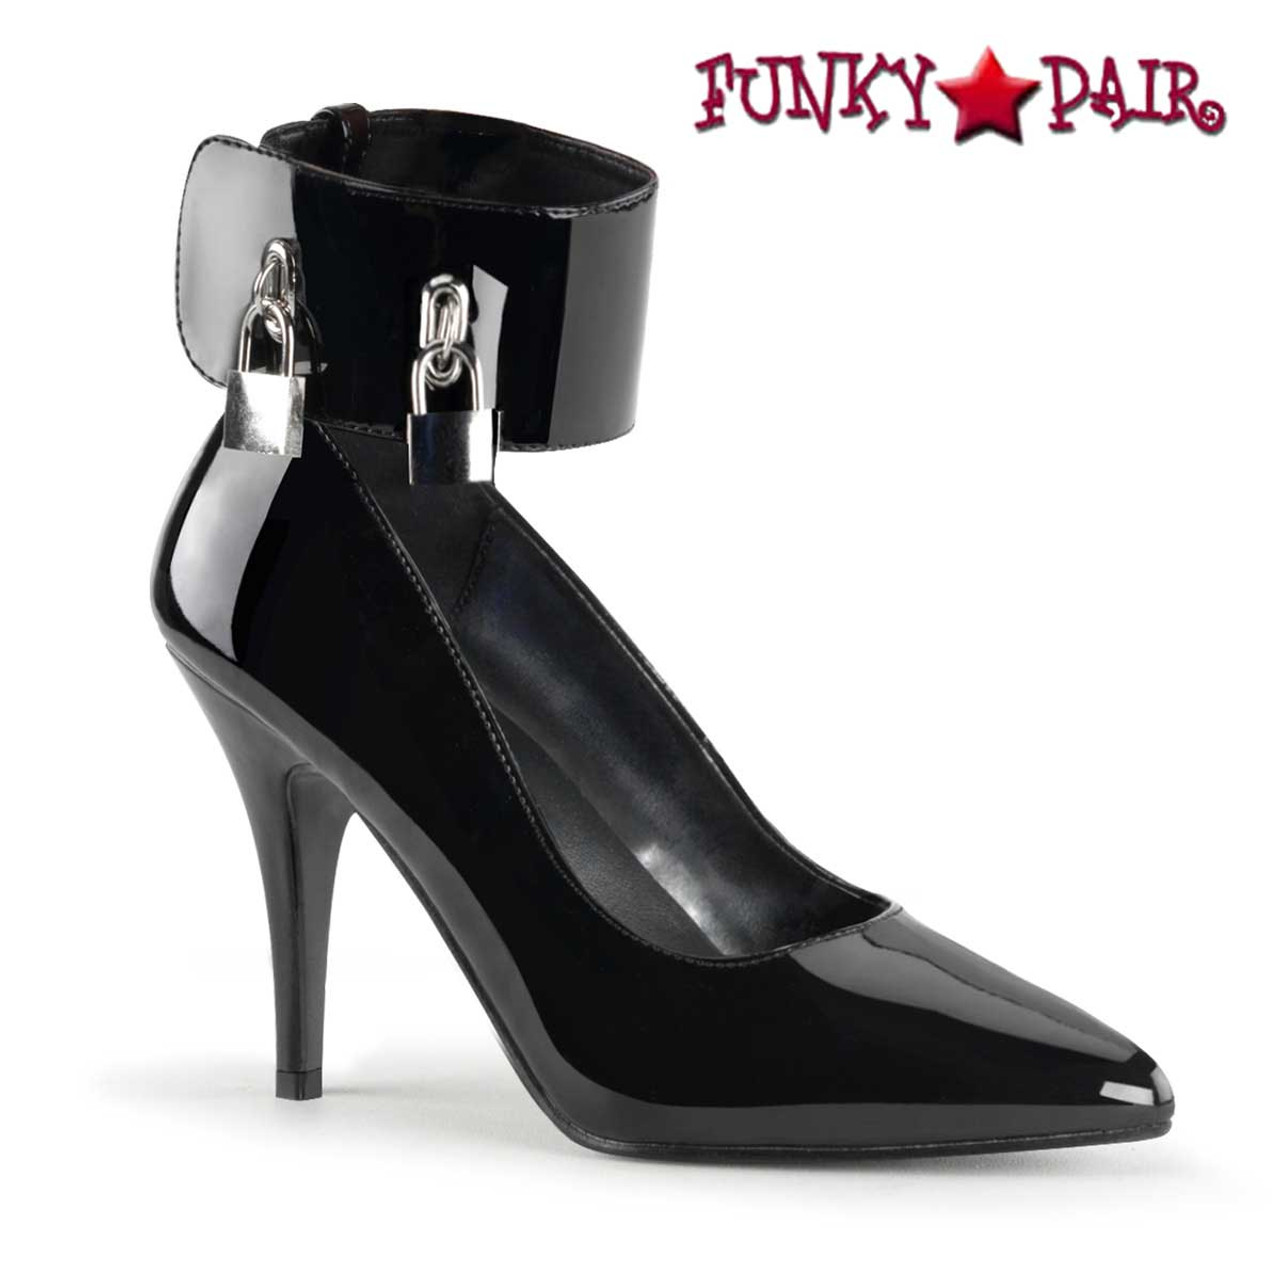 Ankle Strap Patent Pump Shoe with 5-inch Stiletto Heel 3-colors